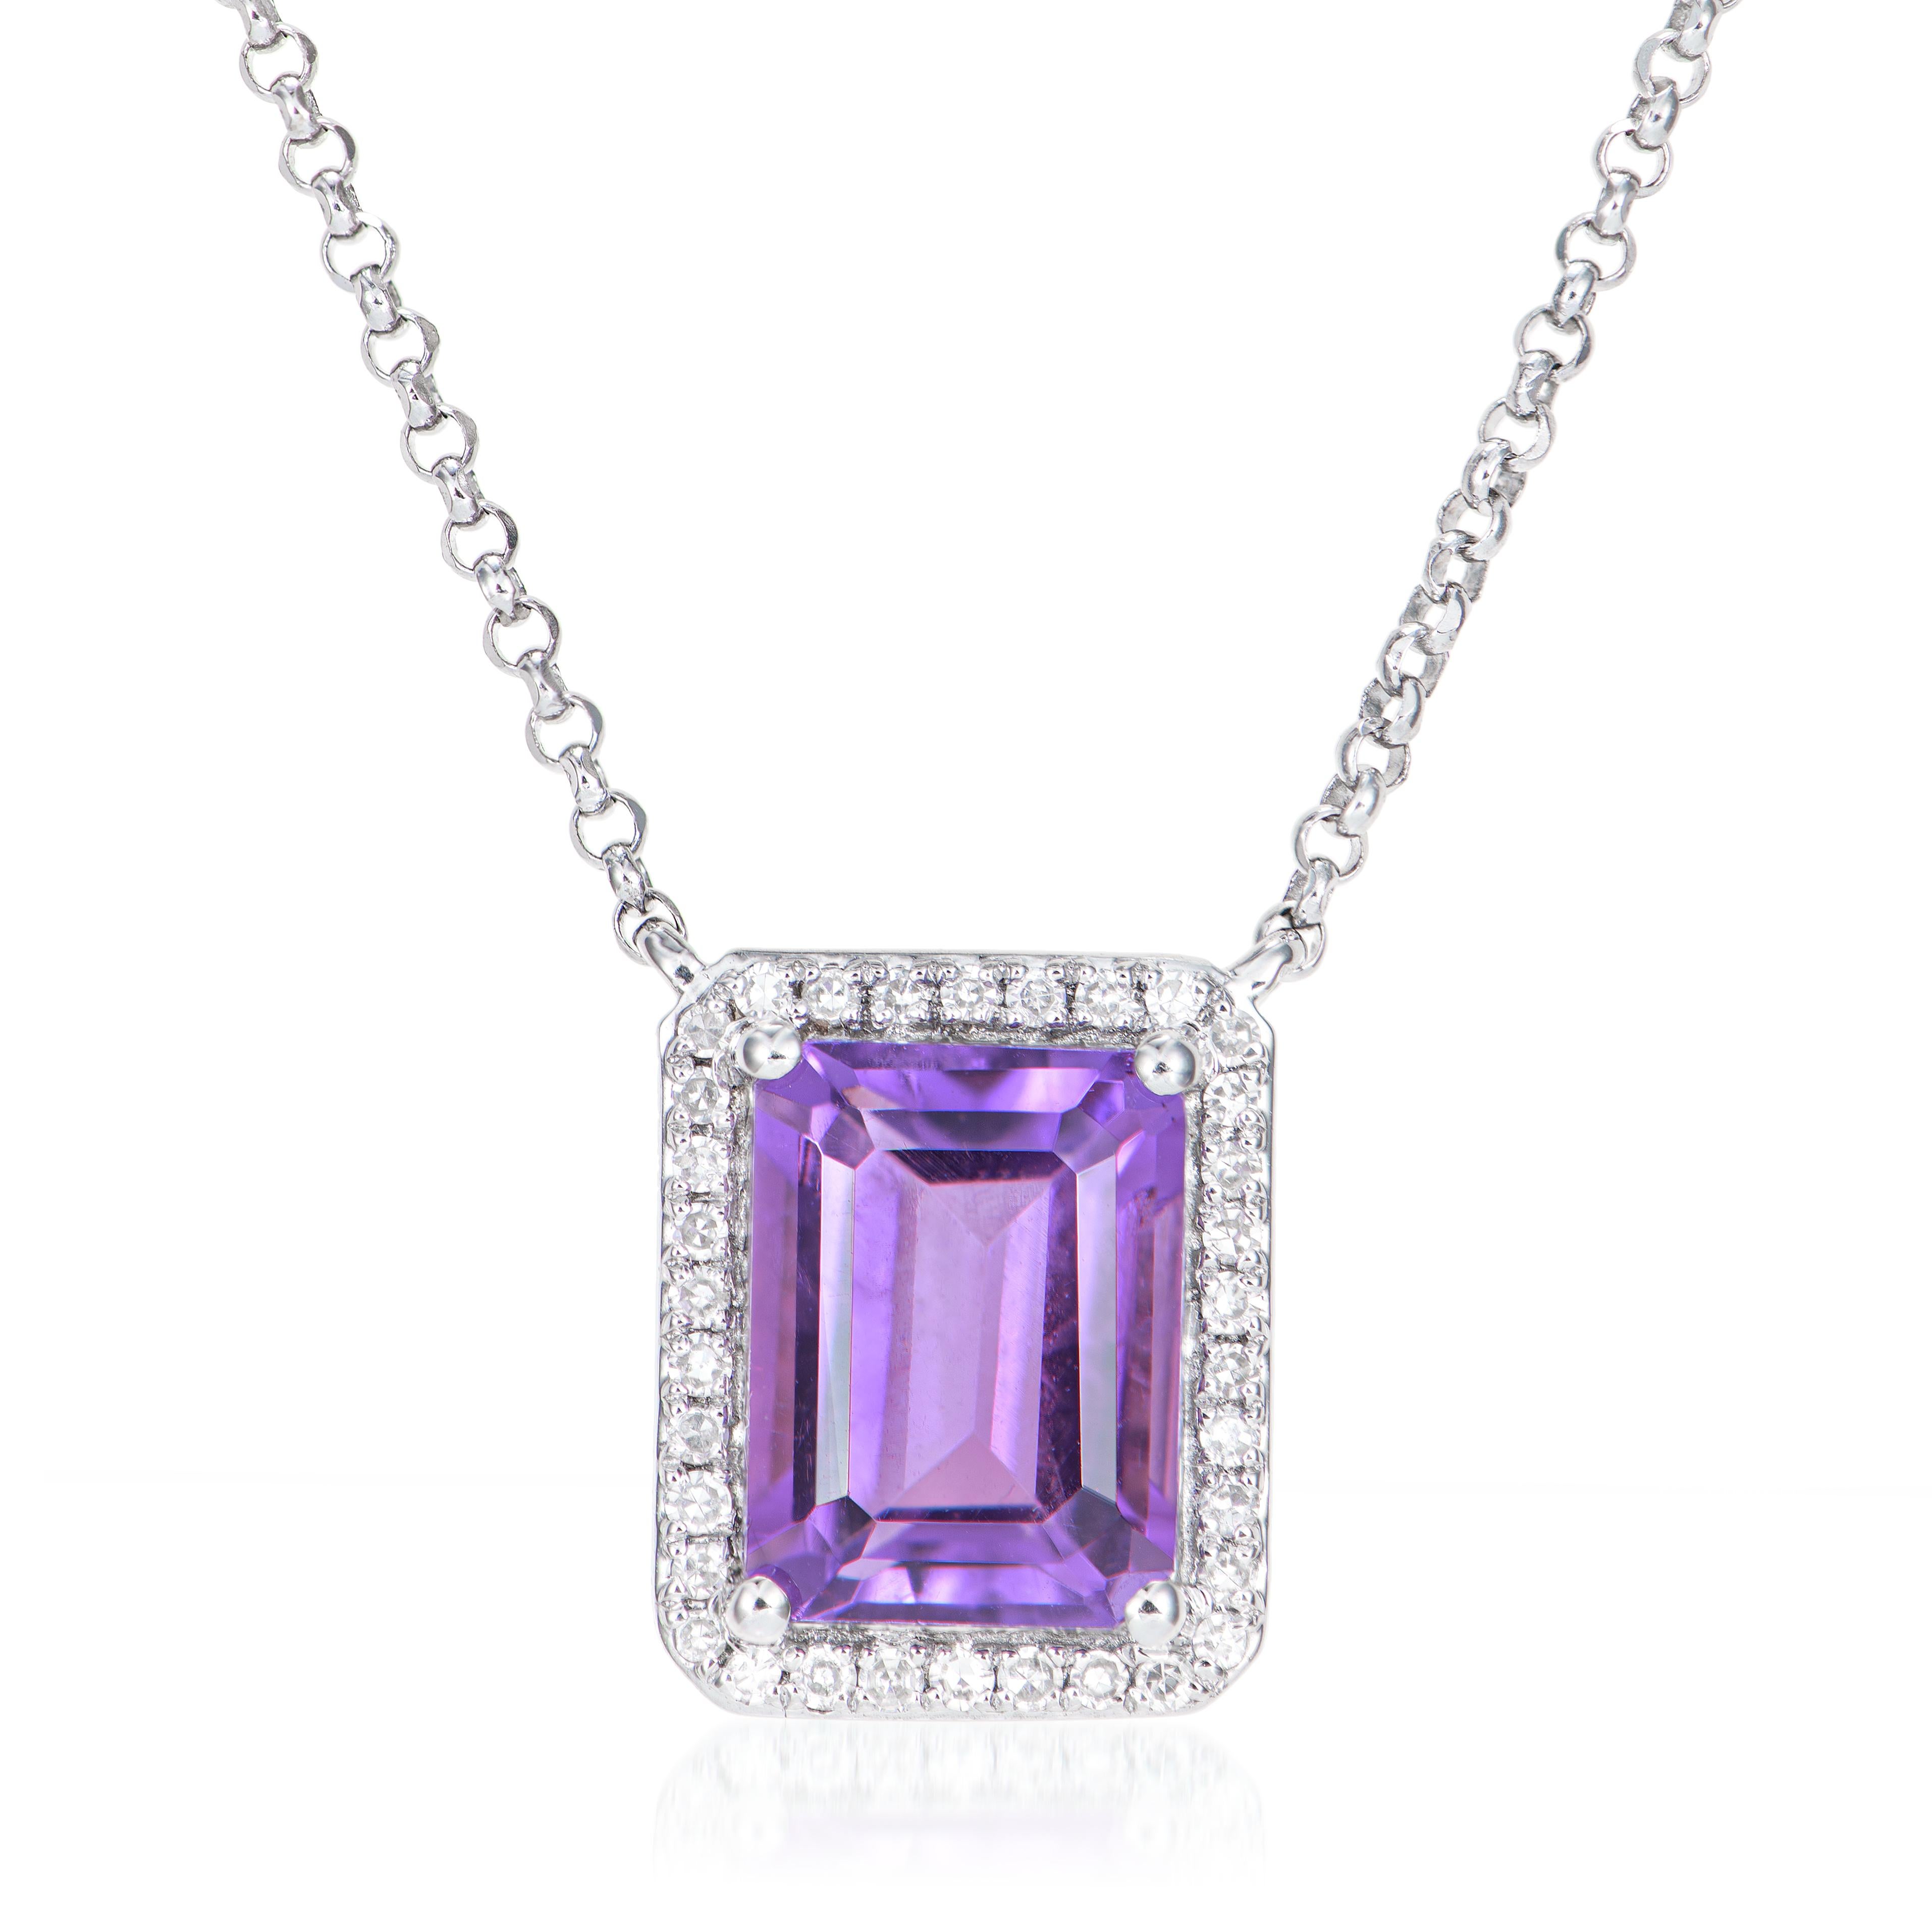 Octagon Cut 1.40 Carat Amethyst Pendant in 18Karat White Gold with White Diamond. For Sale